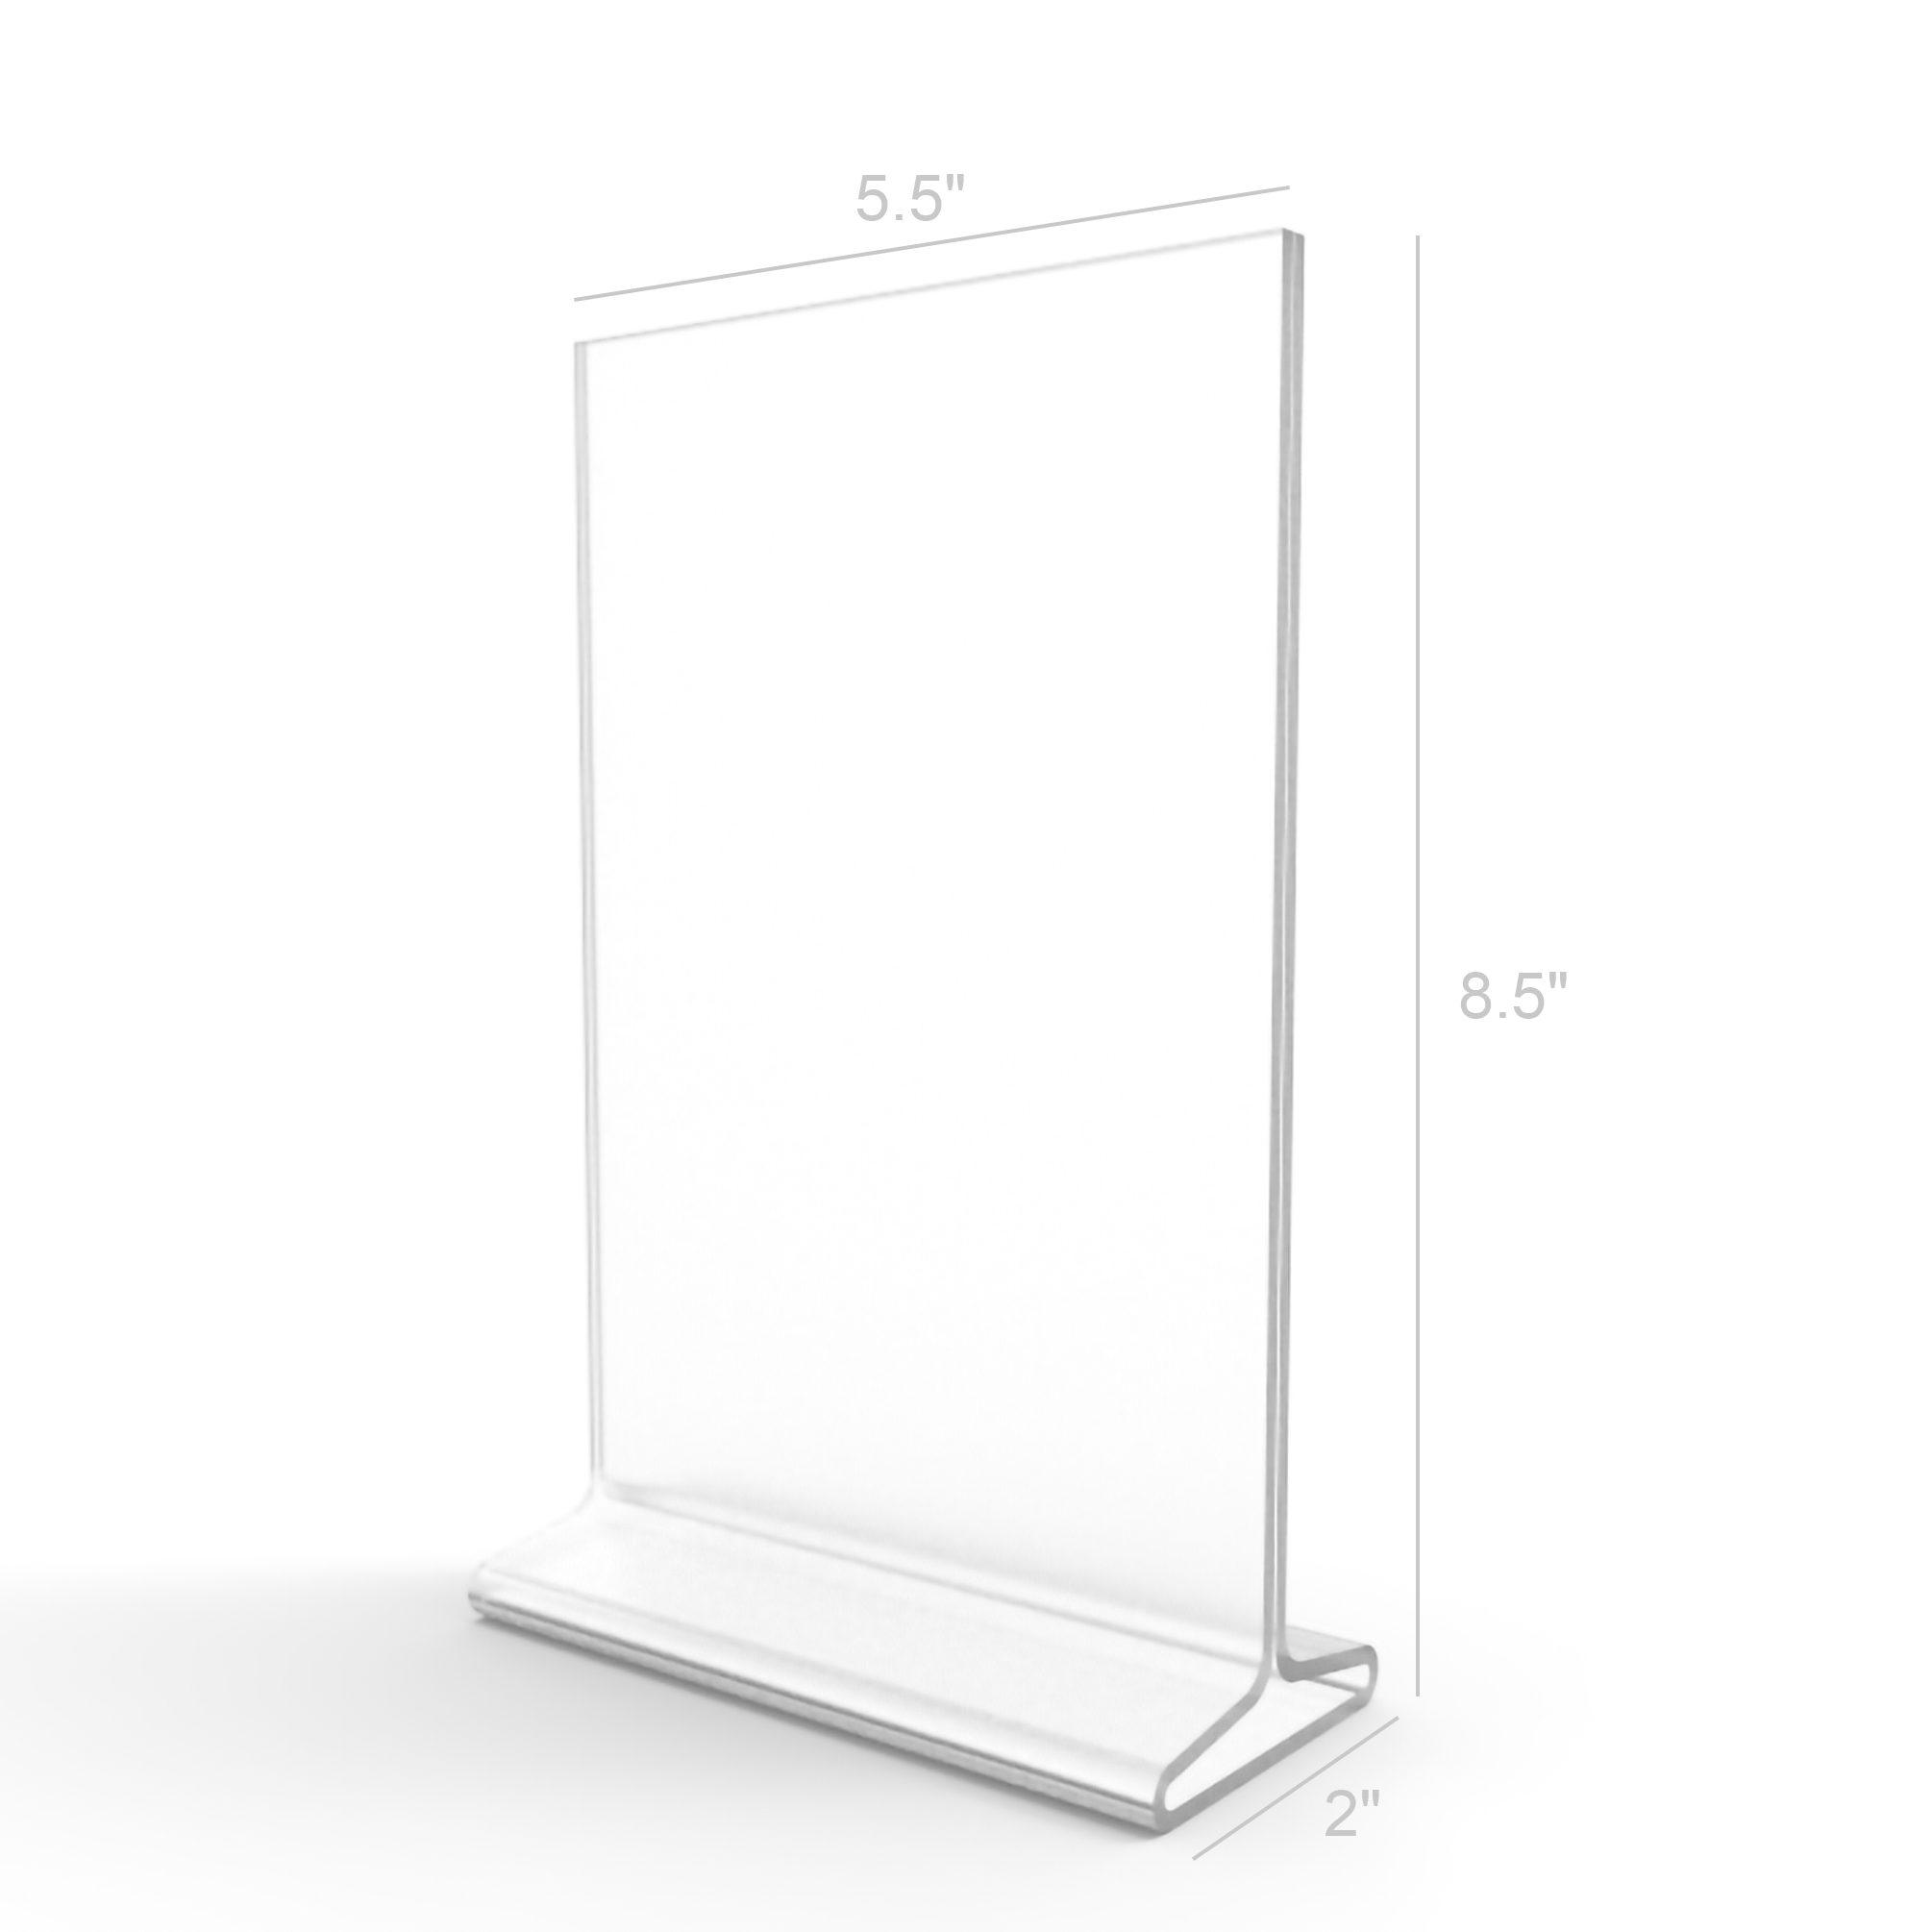 FixtureDisplays 5.5 x 8.5 Acrylic Sign Holder for Tabletops, Top Insert, T-style - Clear  19068